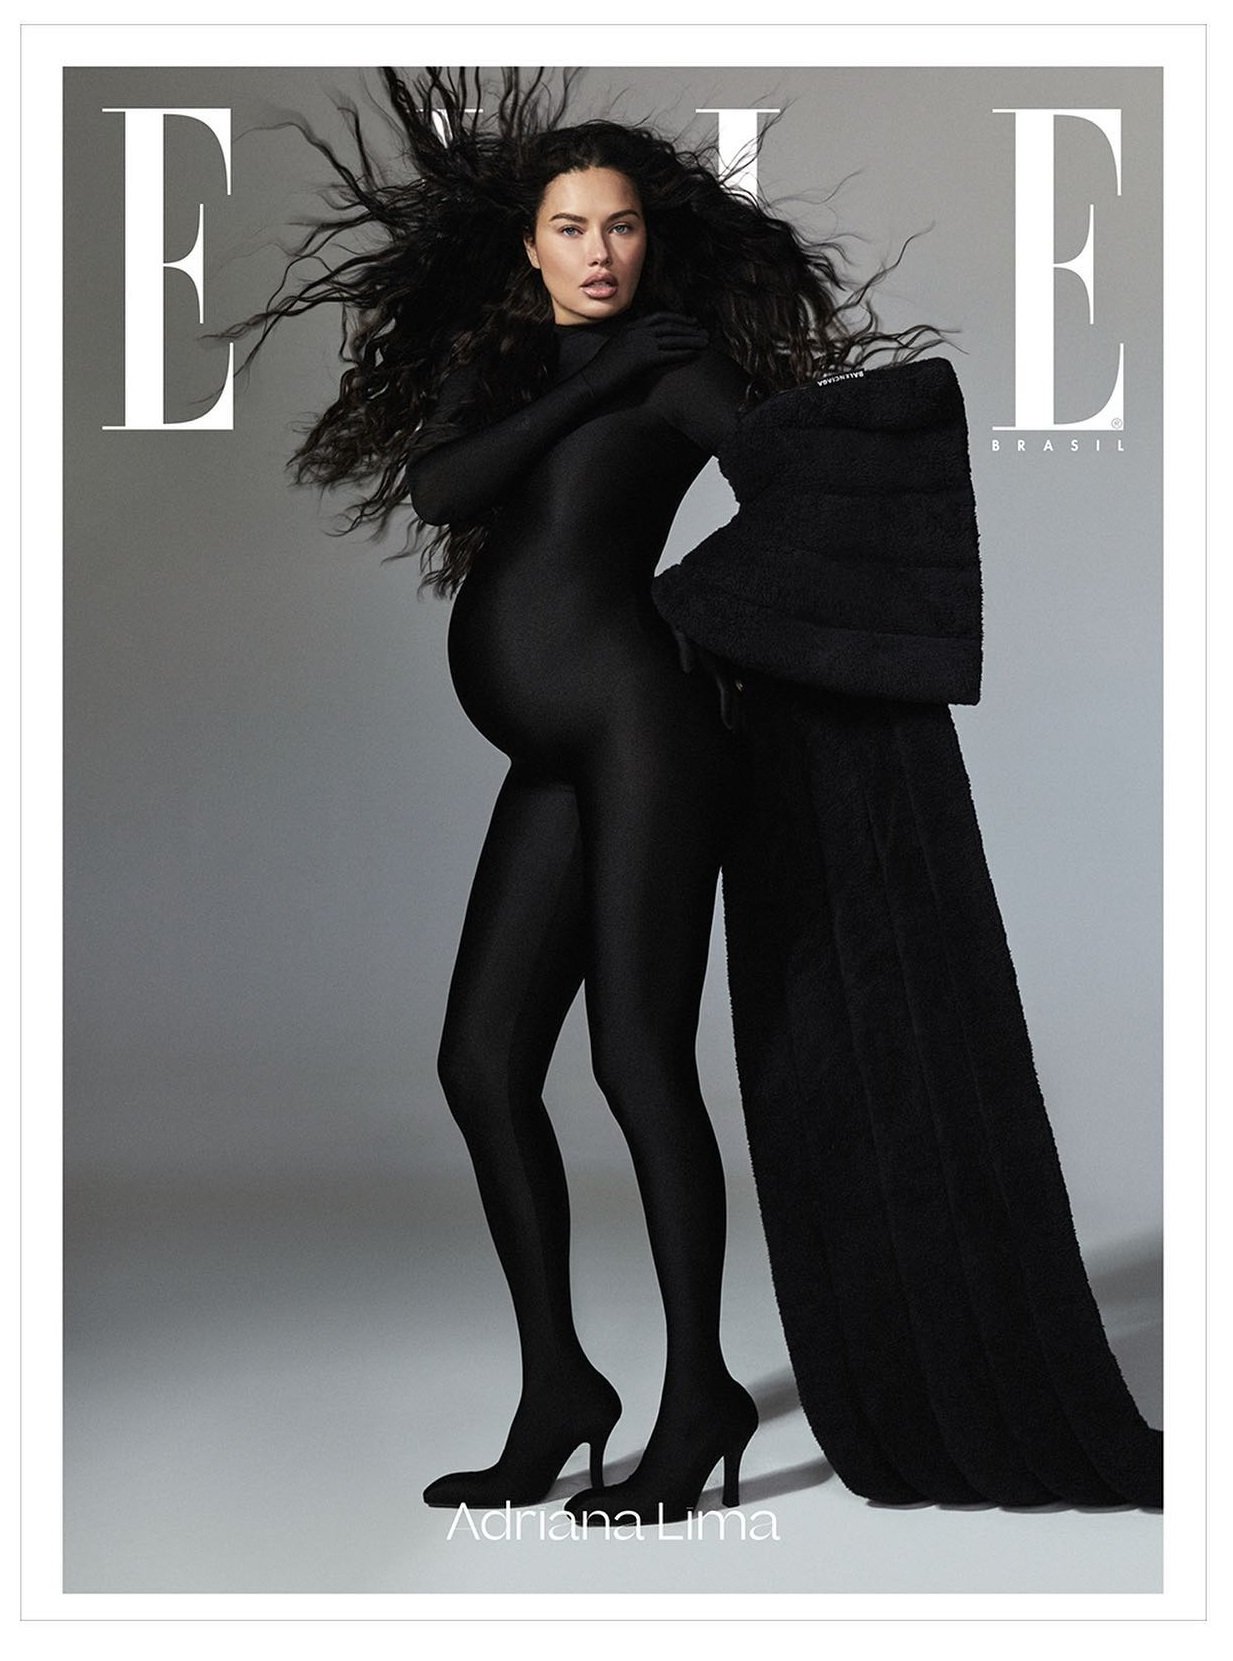 Adriana Lima Covers ELLE Brazil with Pregnant Mama IG Nod to